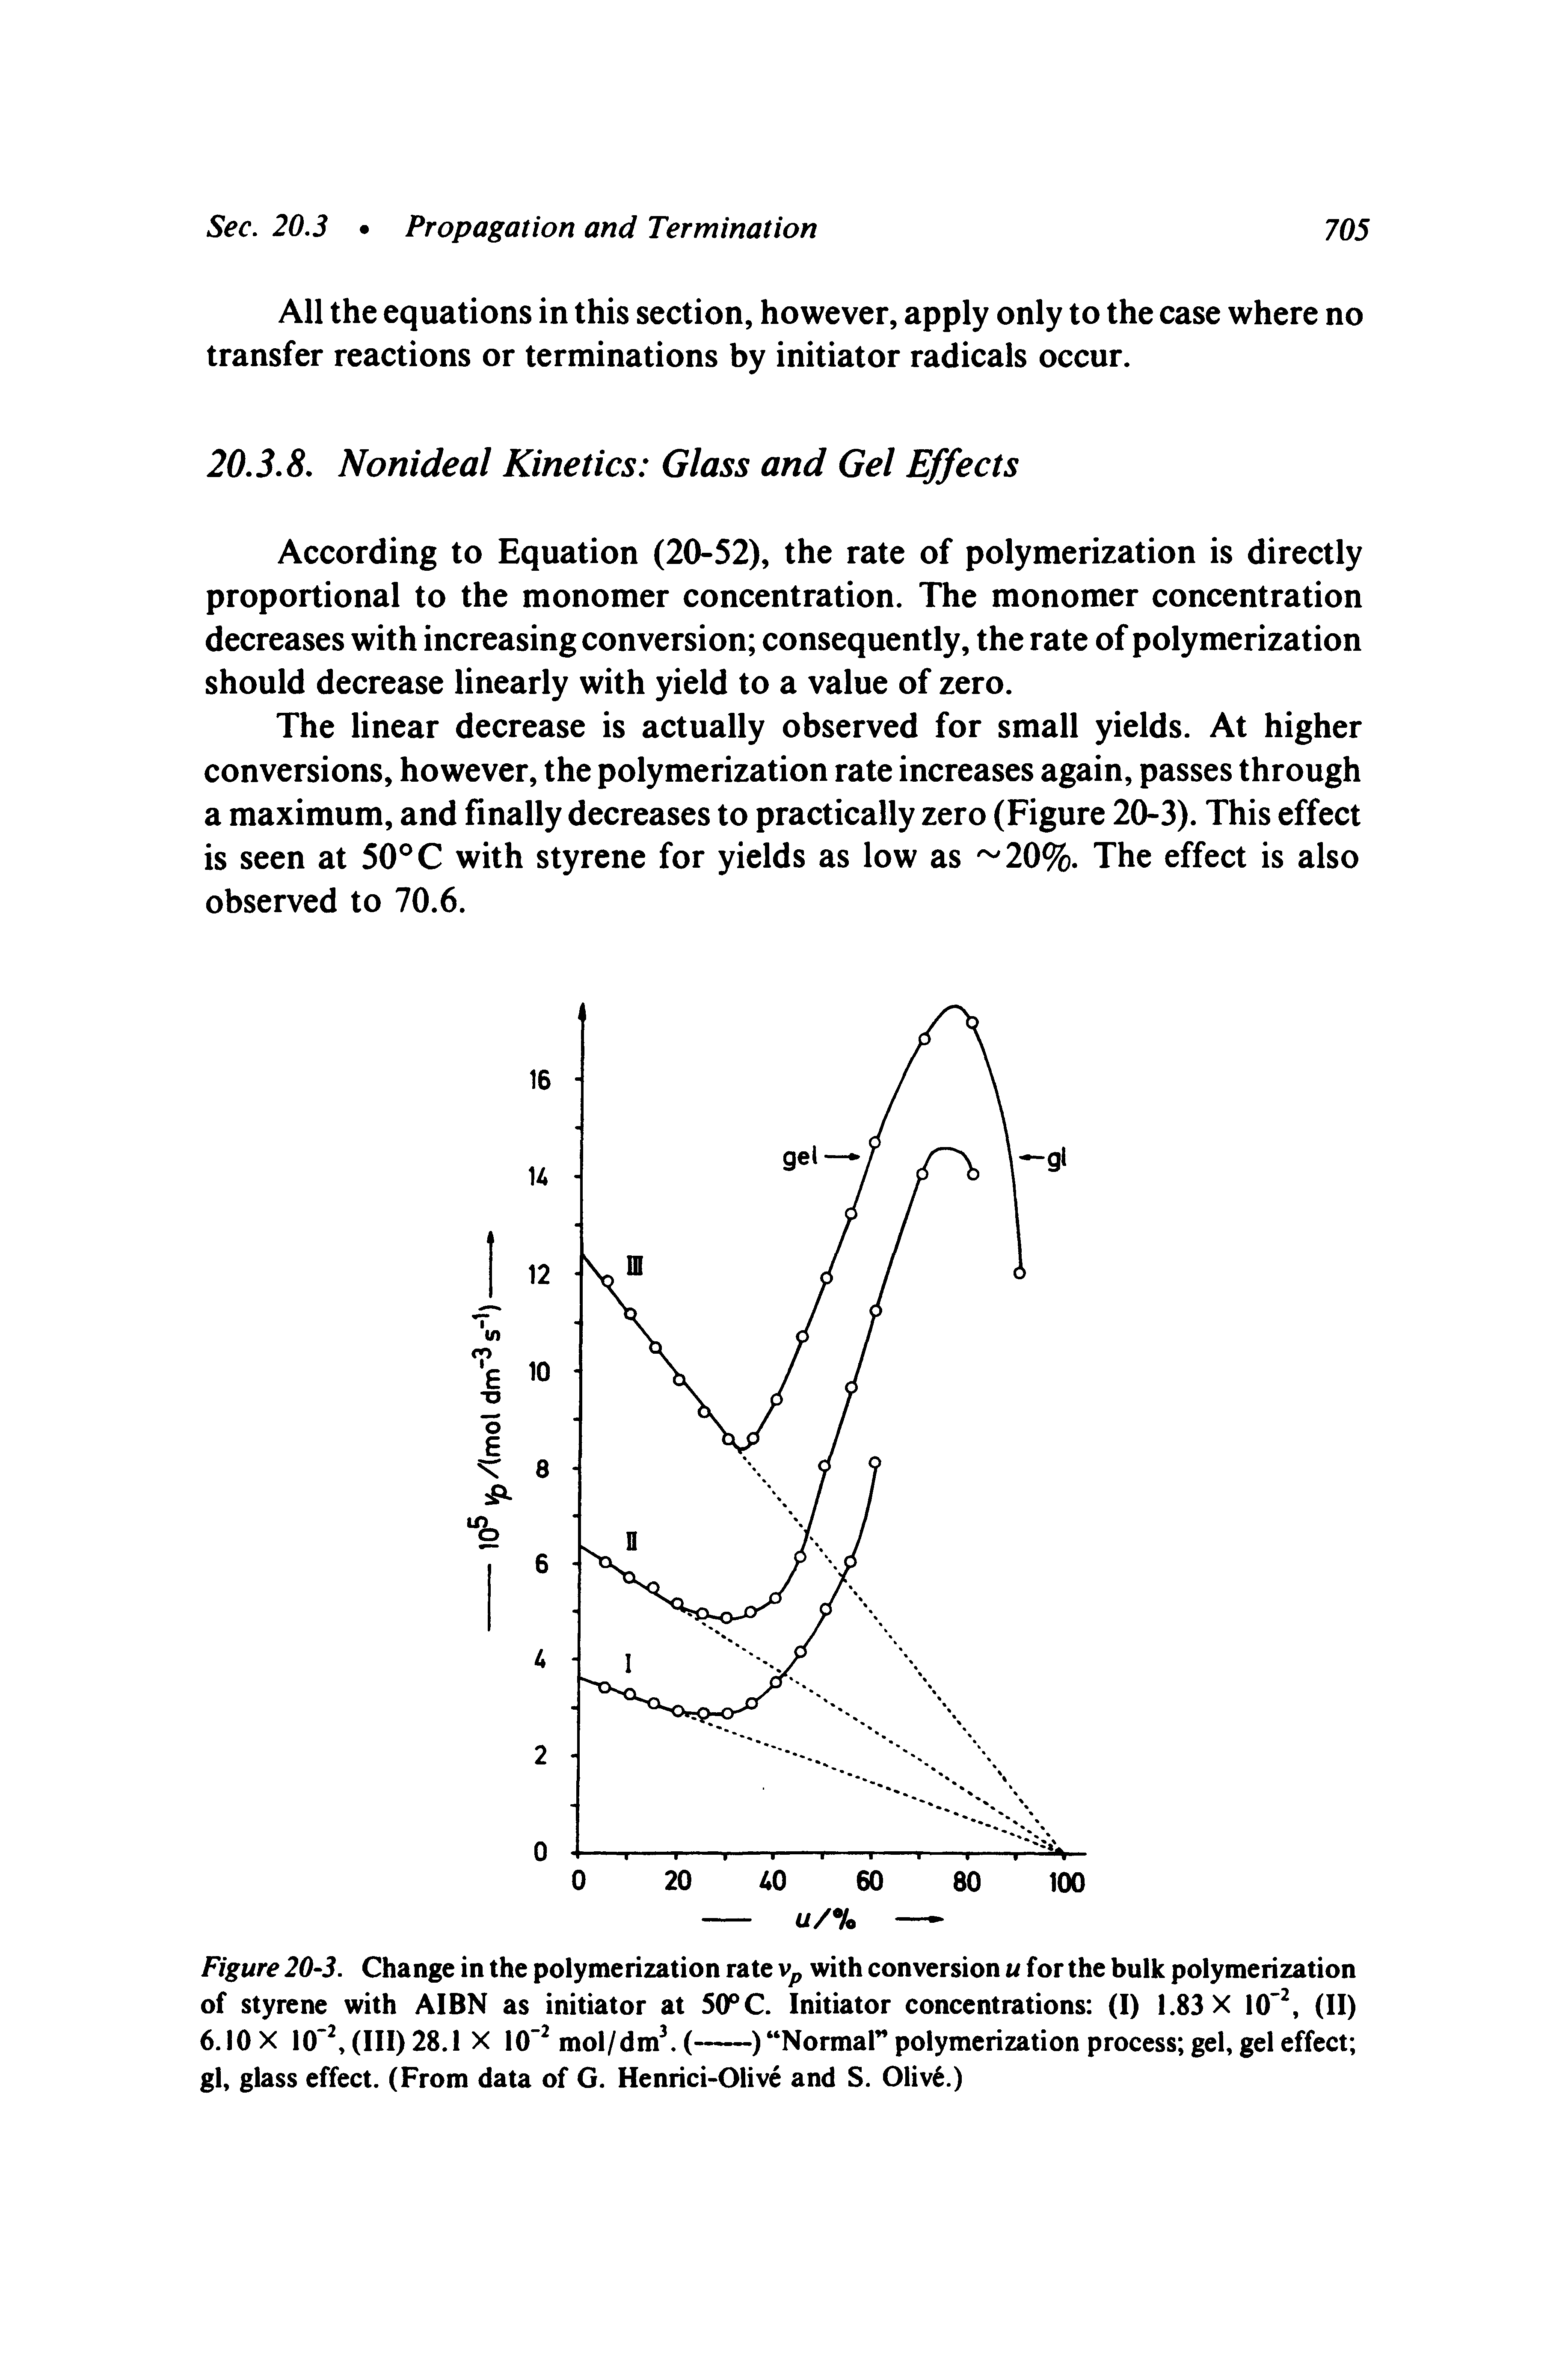 Figure 20-3. Change in the polymerization rate Vp with conversion t/ for the bulk polymerization of styrene with AIBN as initiator at 50°C. Initiator concentrations (I) 1.83 X 10, (II)...